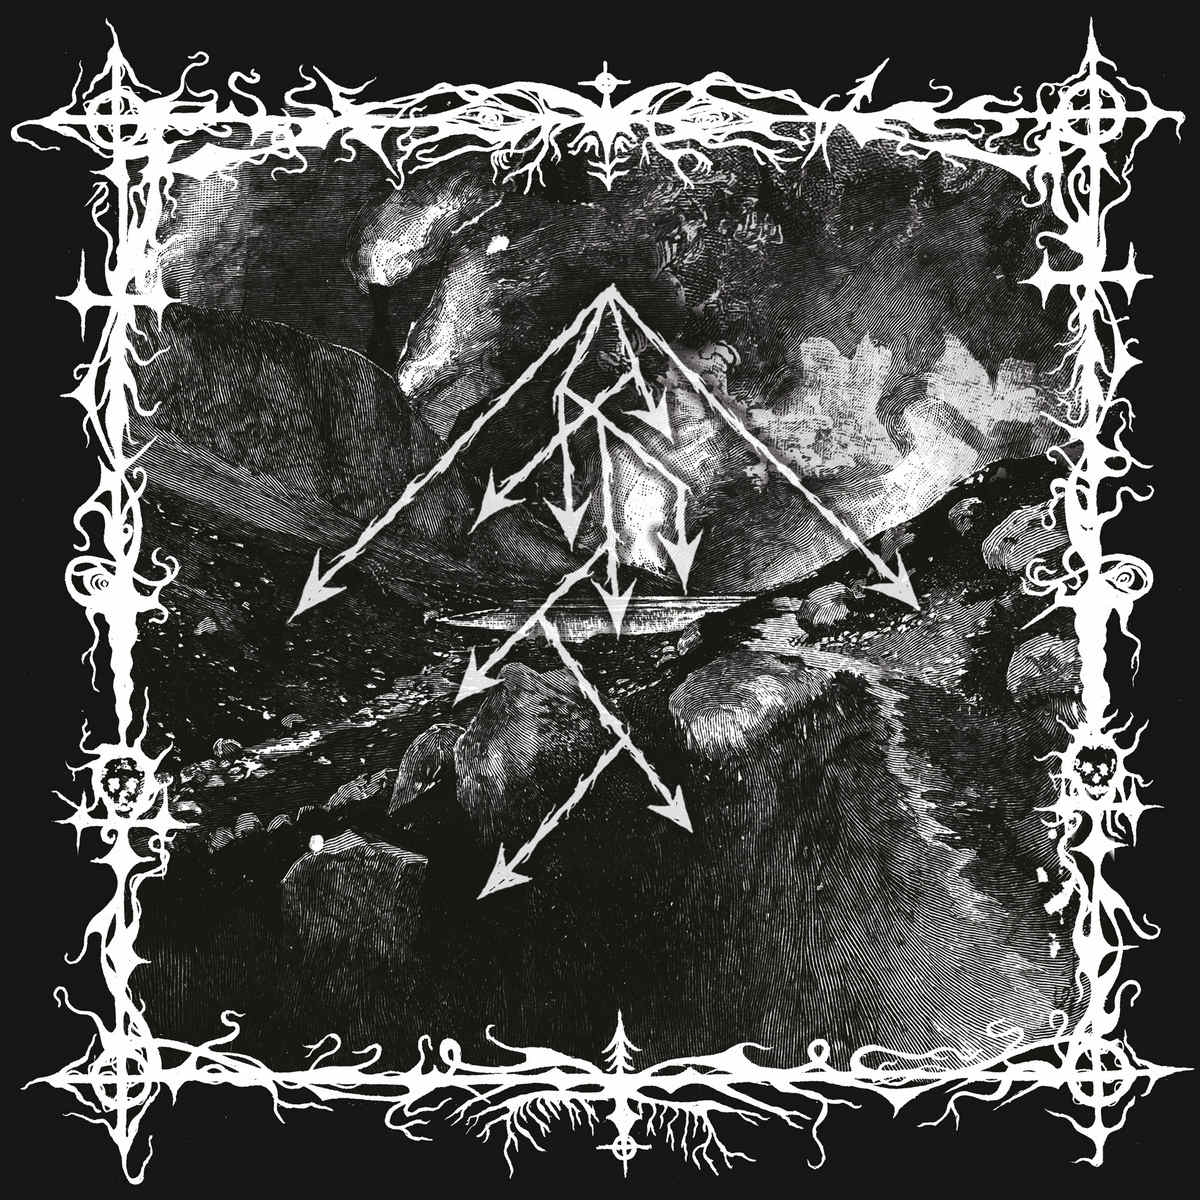 sulpur – embracing hatred and beckoning darkness